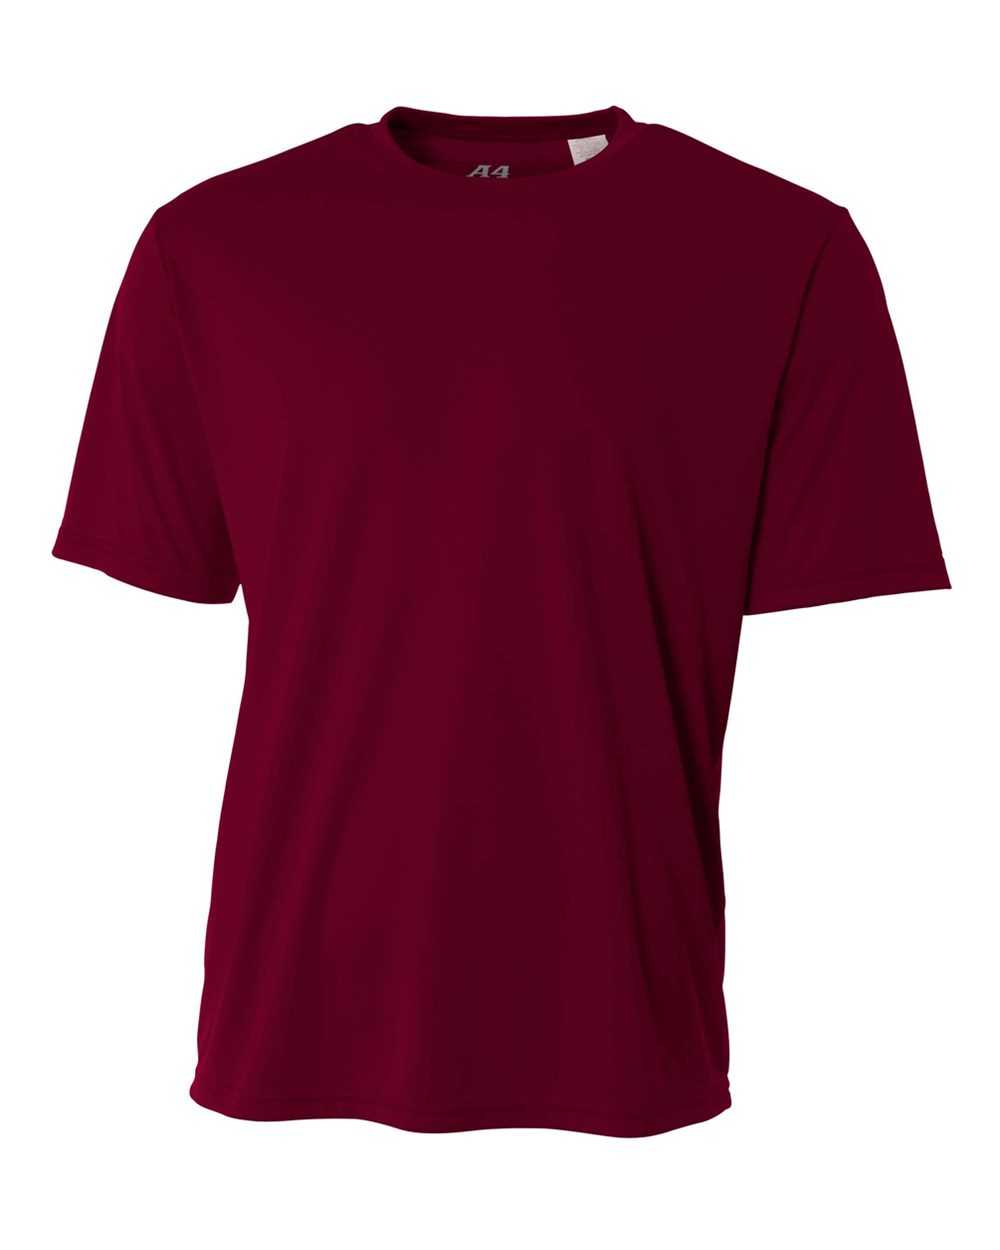 A4 N3142 Cooling Performance T-Shirt - Maroon M